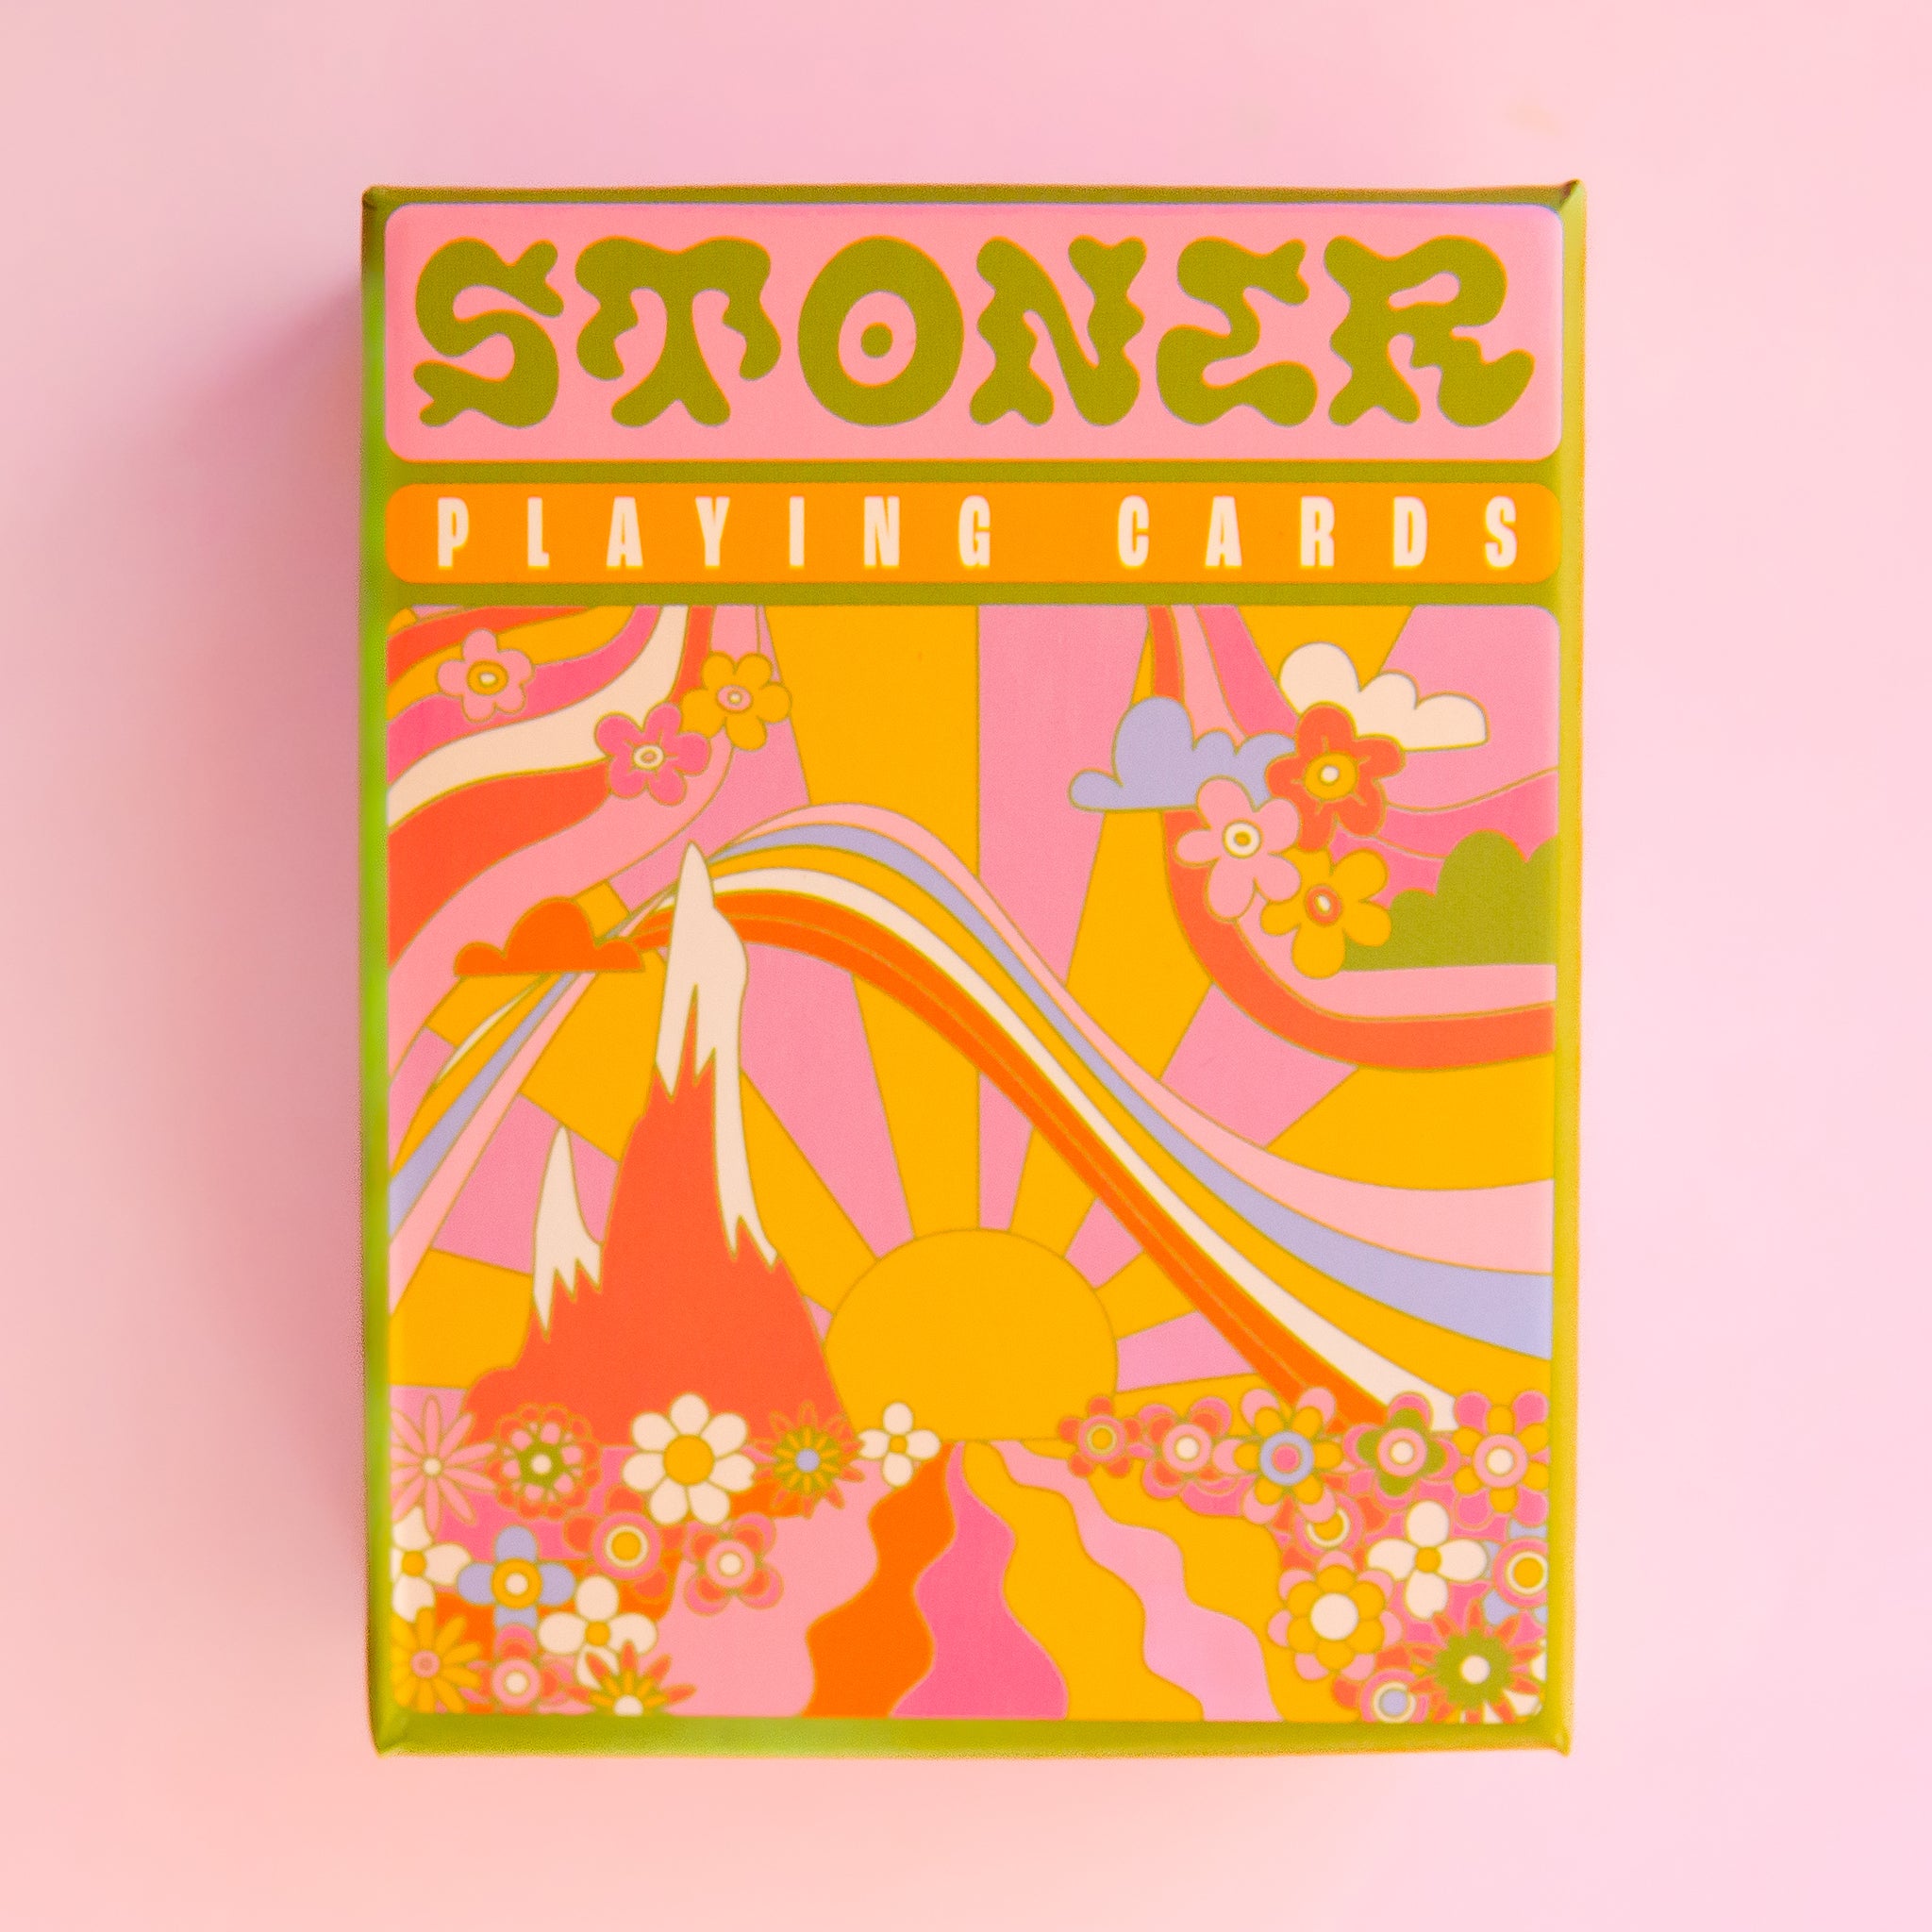 A set of colorful playing cards with florals, wavy designs and various sunshine and mountain landscape illustrations.